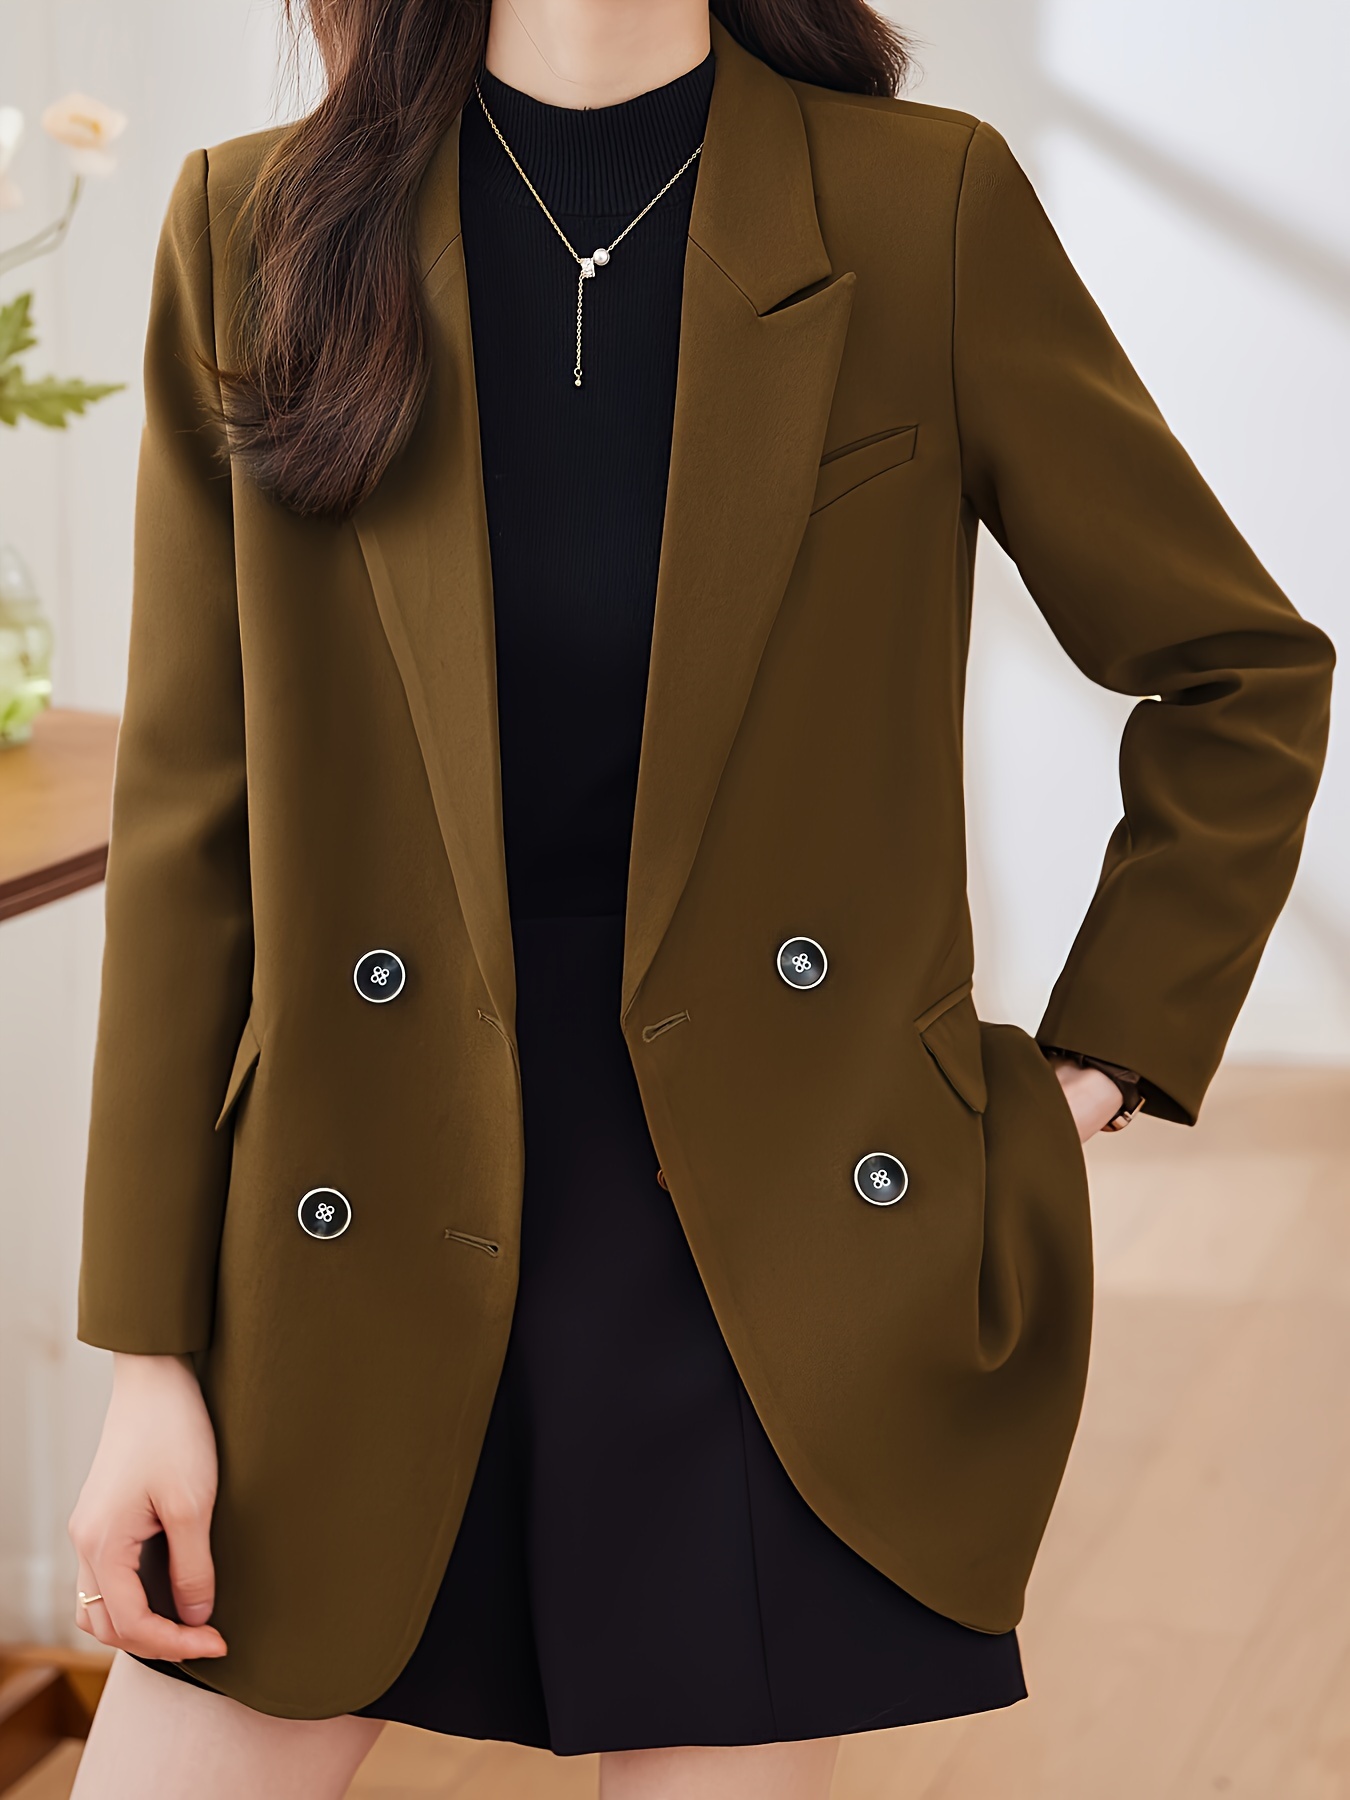 Notched Collar Double-breasted Blazer, Elegant Long Sleeve Blazer For Office & Work, Women s Clothing details 2